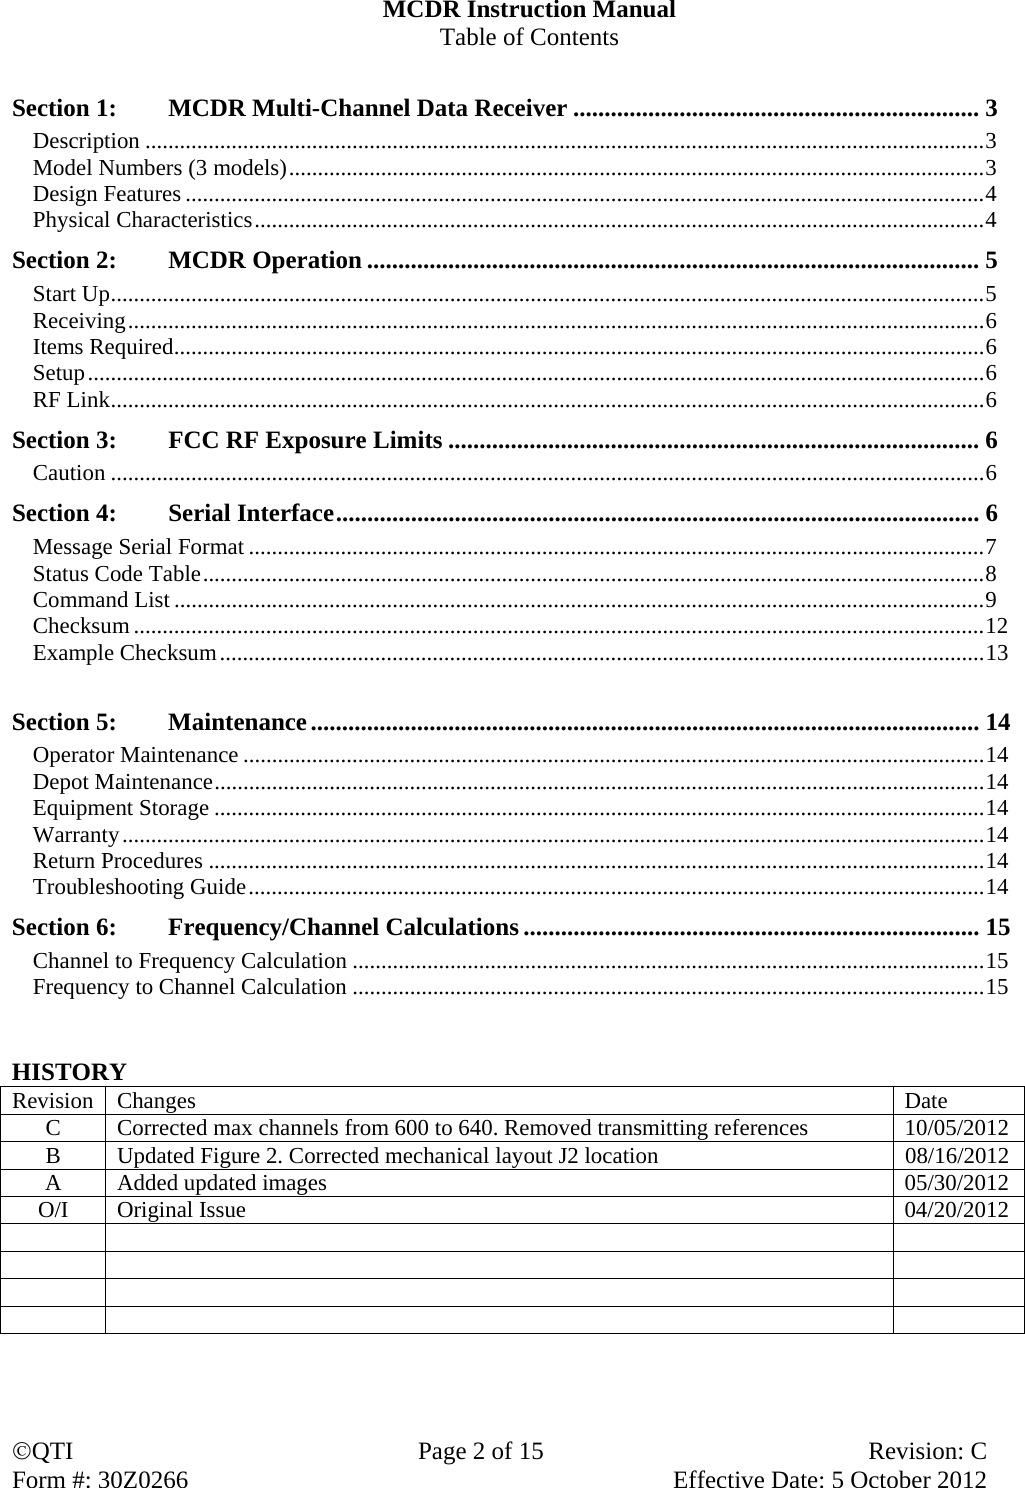 QTI  Page 2 of 15  Revision: C Form #: 30Z0266    Effective Date: 5 October 2012 MCDR Instruction Manual Table of Contents  Section 1:  MCDR Multi-Channel Data Receiver ................................................................. 3 Description .................................................................................................................................................. 3 Model Numbers (3 models) ......................................................................................................................... 3 Design Features ........................................................................................................................................... 4 Physical Characteristics ............................................................................................................................... 4 Section 2:  MCDR Operation .................................................................................................. 5 Start Up ........................................................................................................................................................ 5 Receiving ..................................................................................................................................................... 6 Items Required ............................................................................................................................................. 6 Setup ............................................................................................................................................................ 6 RF Link ........................................................................................................................................................ 6 Section 3:    FCC RF Exposure Limits ..................................................................................... 6 Caution ........................................................................................................................................................ 6 Section 4:  Serial Interface ....................................................................................................... 6 Message Serial Format ................................................................................................................................ 7 Status Code Table ........................................................................................................................................ 8 Command List ............................................................................................................................................. 9 Checksum .................................................................................................................................................... 12 Example Checksum ..................................................................................................................................... 13  Section 5:  Maintenance ........................................................................................................... 14 Operator Maintenance ................................................................................................................................. 14 Depot Maintenance ...................................................................................................................................... 14 Equipment Storage ...................................................................................................................................... 14 Warranty ...................................................................................................................................................... 14 Return Procedures ....................................................................................................................................... 14 Troubleshooting Guide ................................................................................................................................ 14 Section 6:  Frequency/Channel Calculations ......................................................................... 15 Channel to Frequency Calculation .............................................................................................................. 15 Frequency to Channel Calculation .............................................................................................................. 15   HISTORY Revision Changes DateC  Corrected max channels from 600 to 640. Removed transmitting references  10/05/2012 B  Updated Figure 2. Corrected mechanical layout J2 location  08/16/2012 A  Added updated images  05/30/2012 O/I Original Issue  04/20/2012                